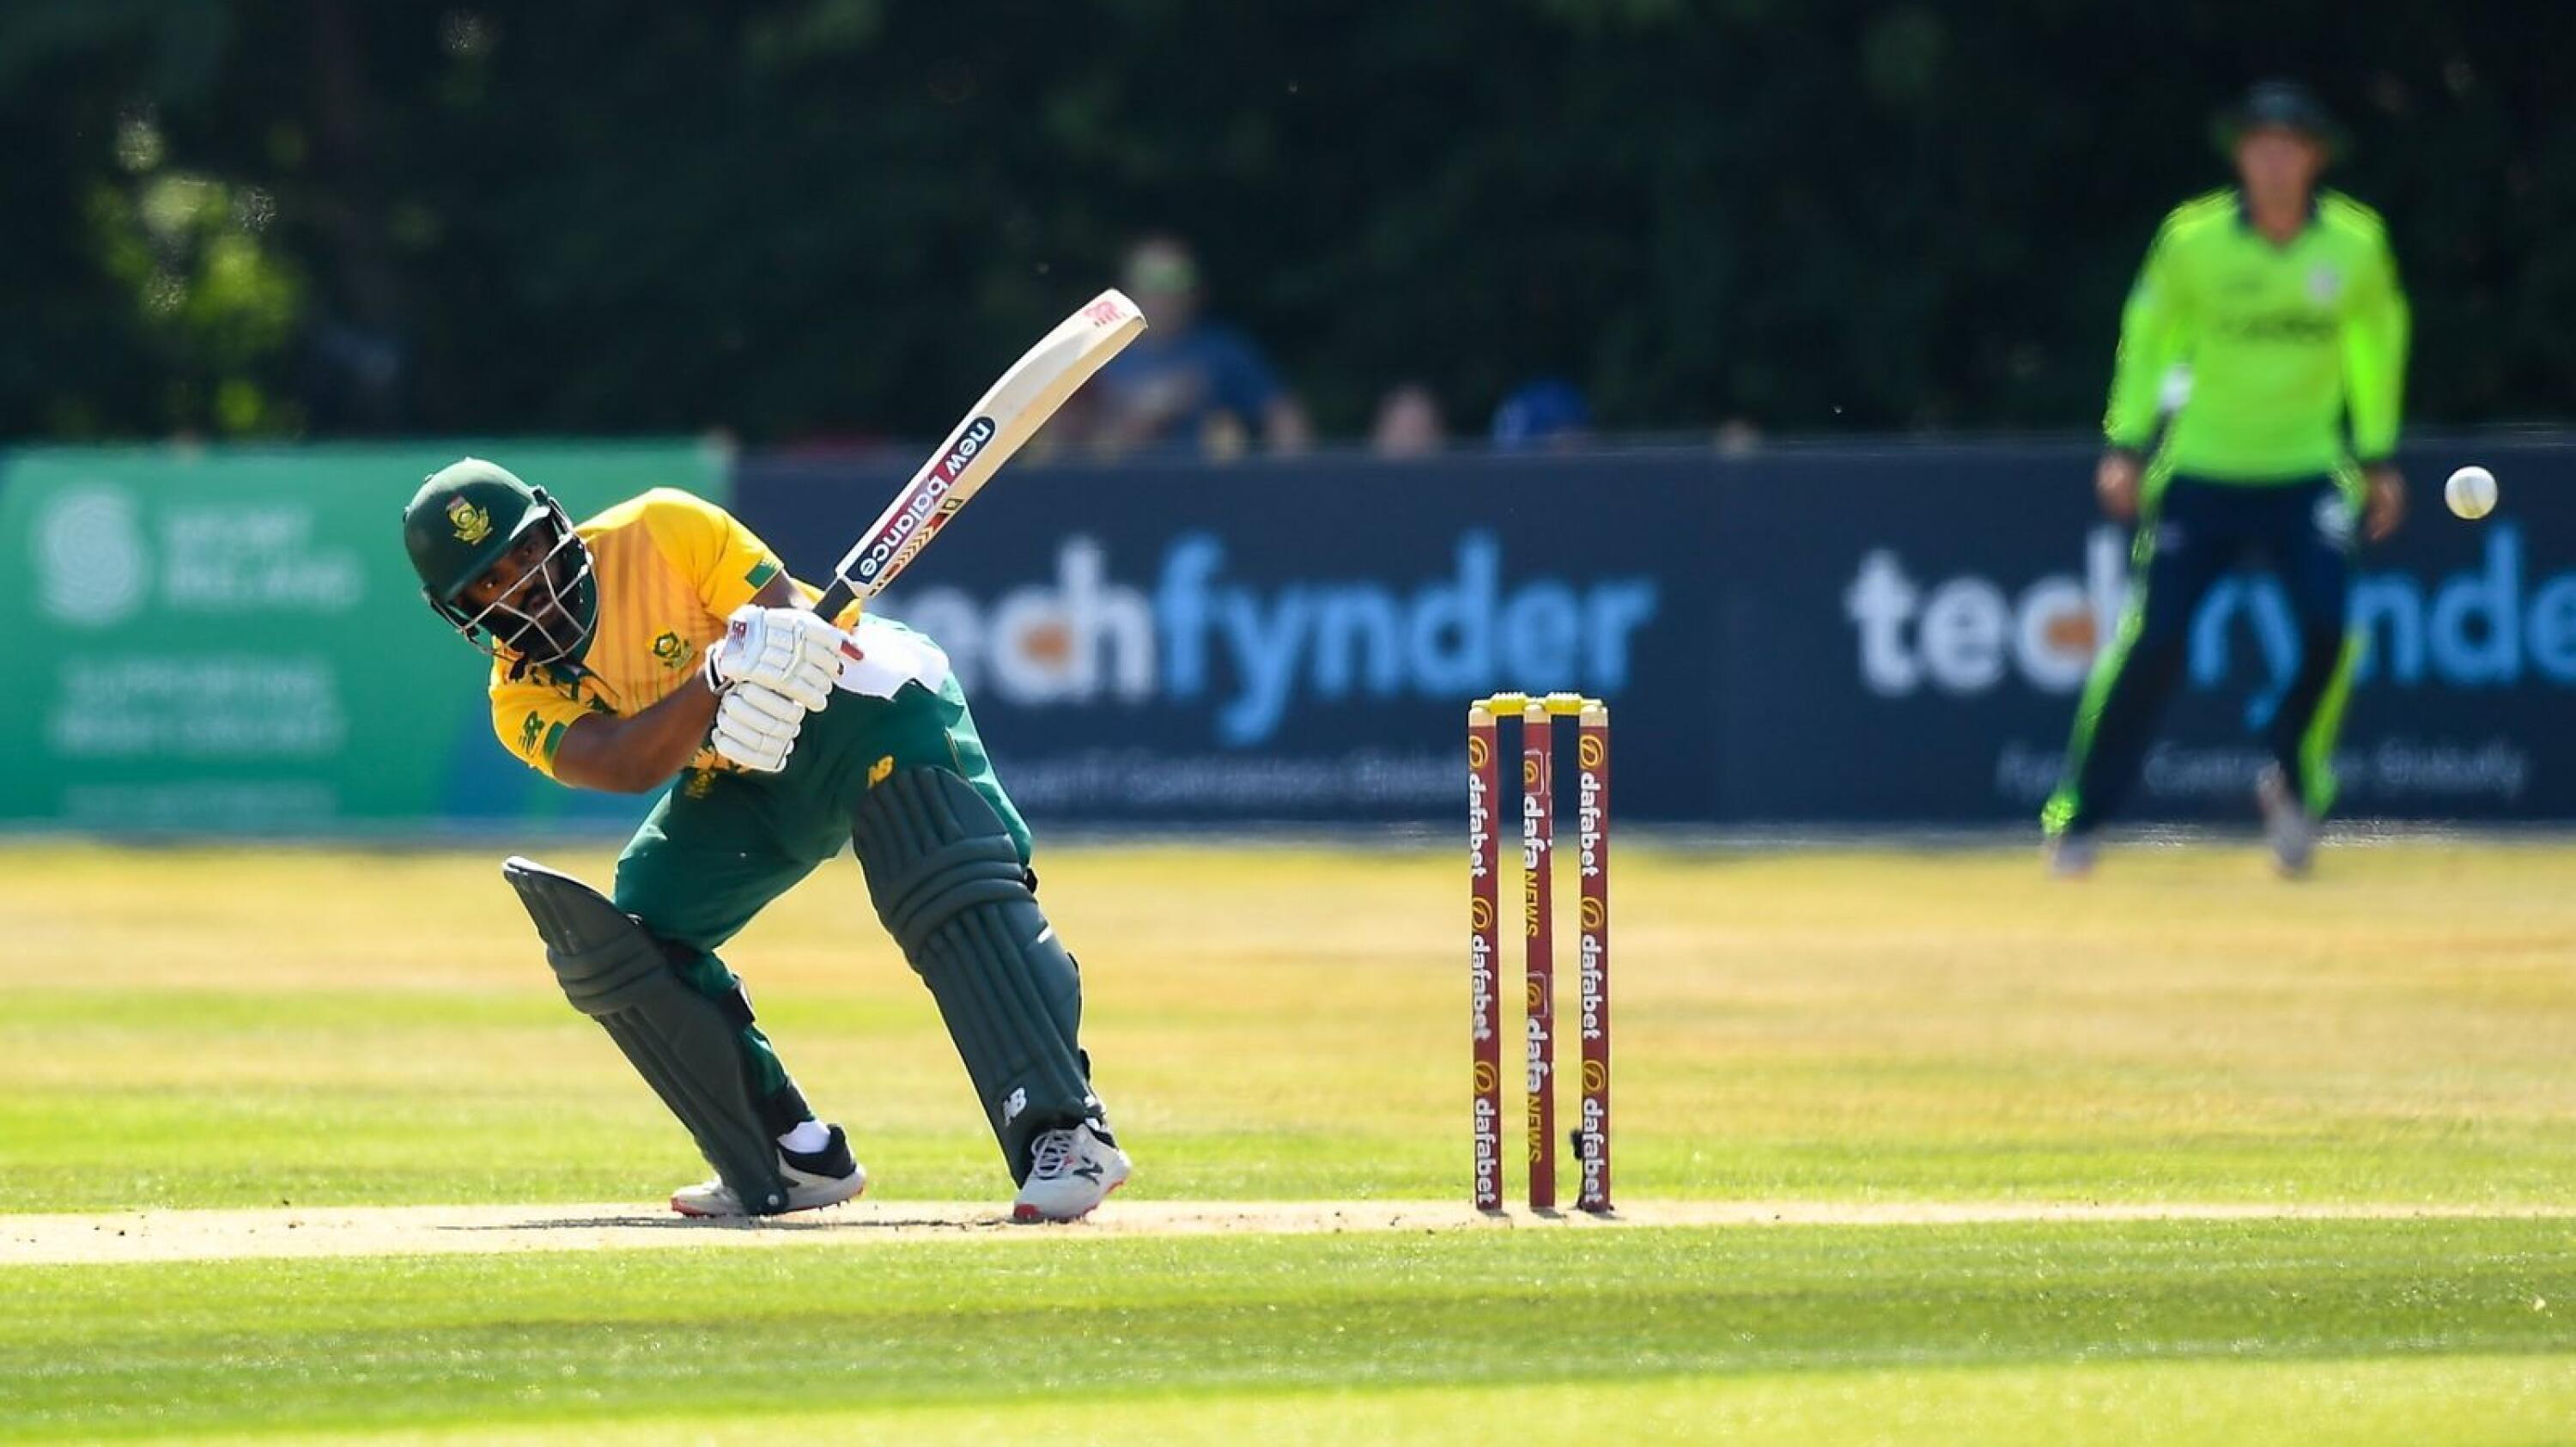 Proteas’ limited overs skipper Temba Bavuma scored an impressive 72 as they beat Ireland by 49 runs on Saturday to complete a 3-0 series win